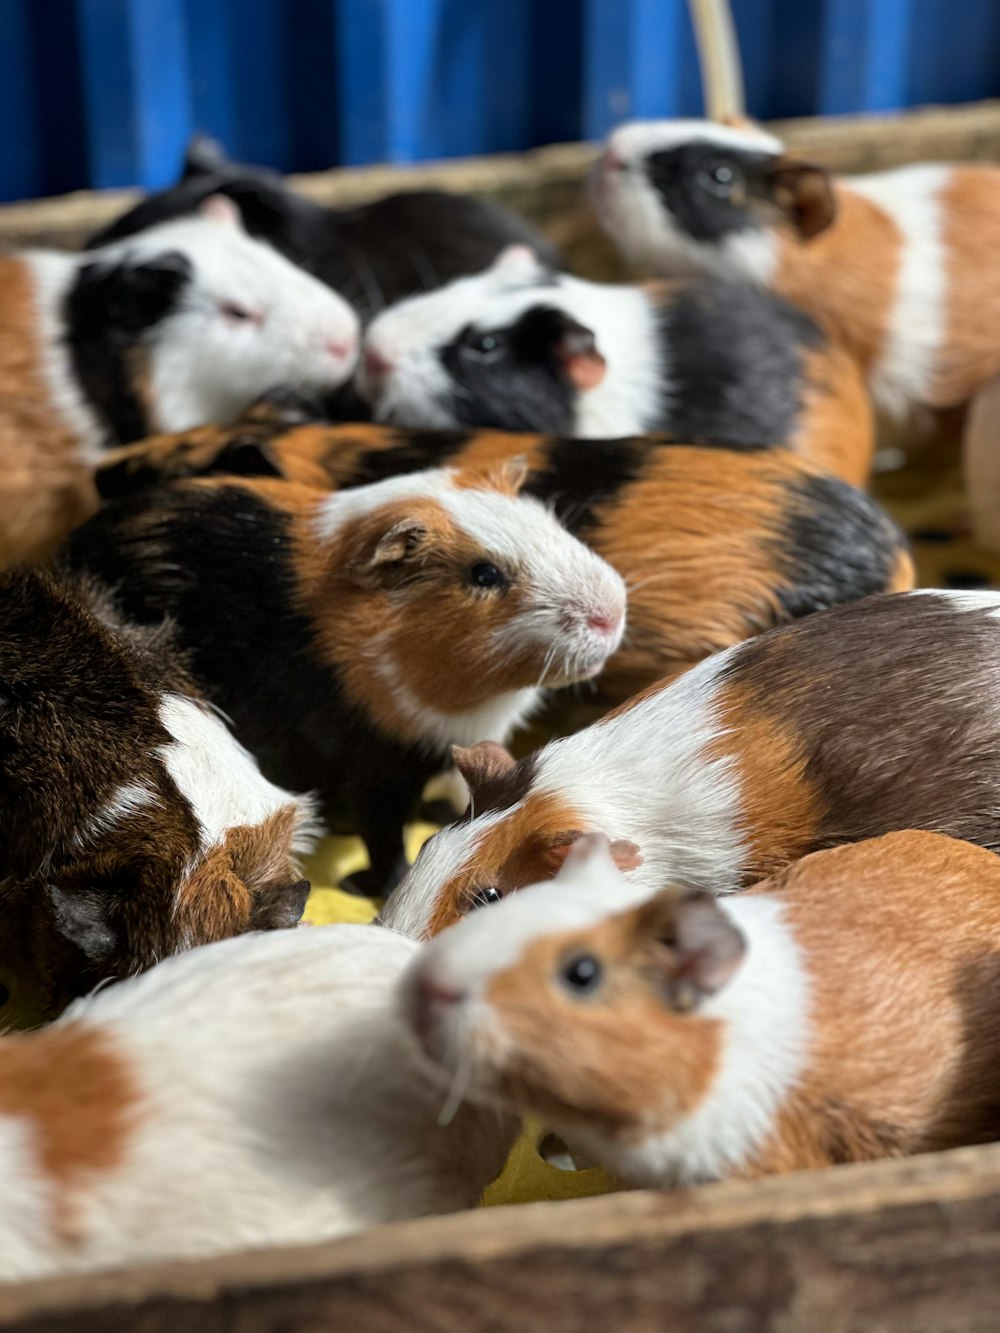 a group of guinea pigs in a wooden box